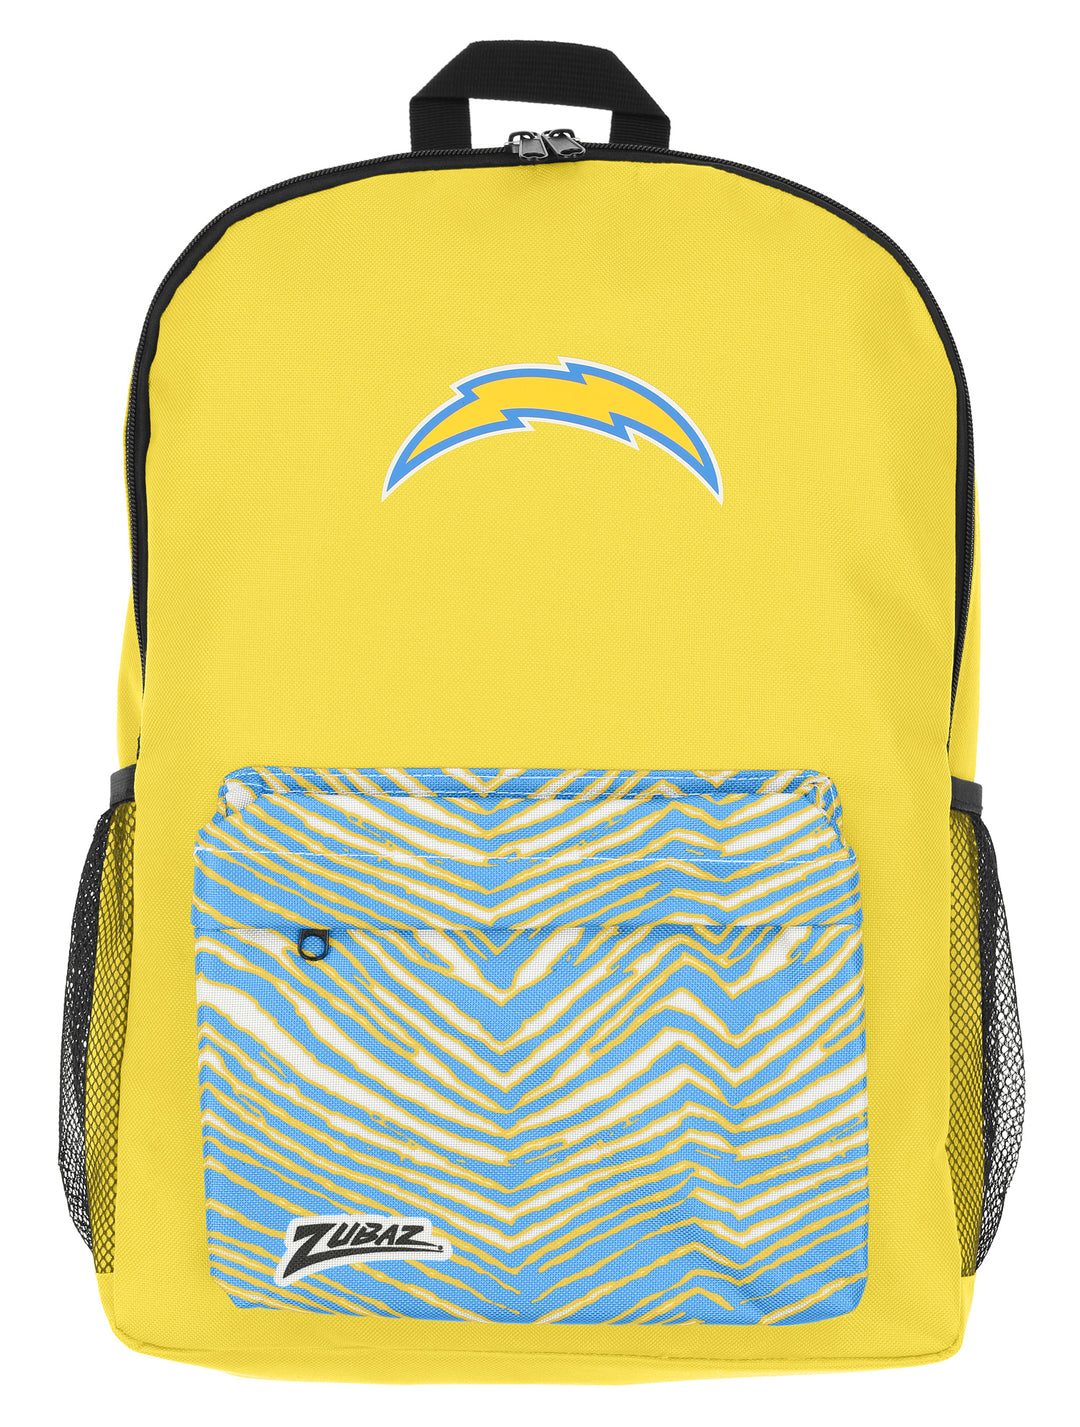 FOCO X ZUBAZ NFL Los Angeles Chargers Zebra 2 Collab Printed Backpack